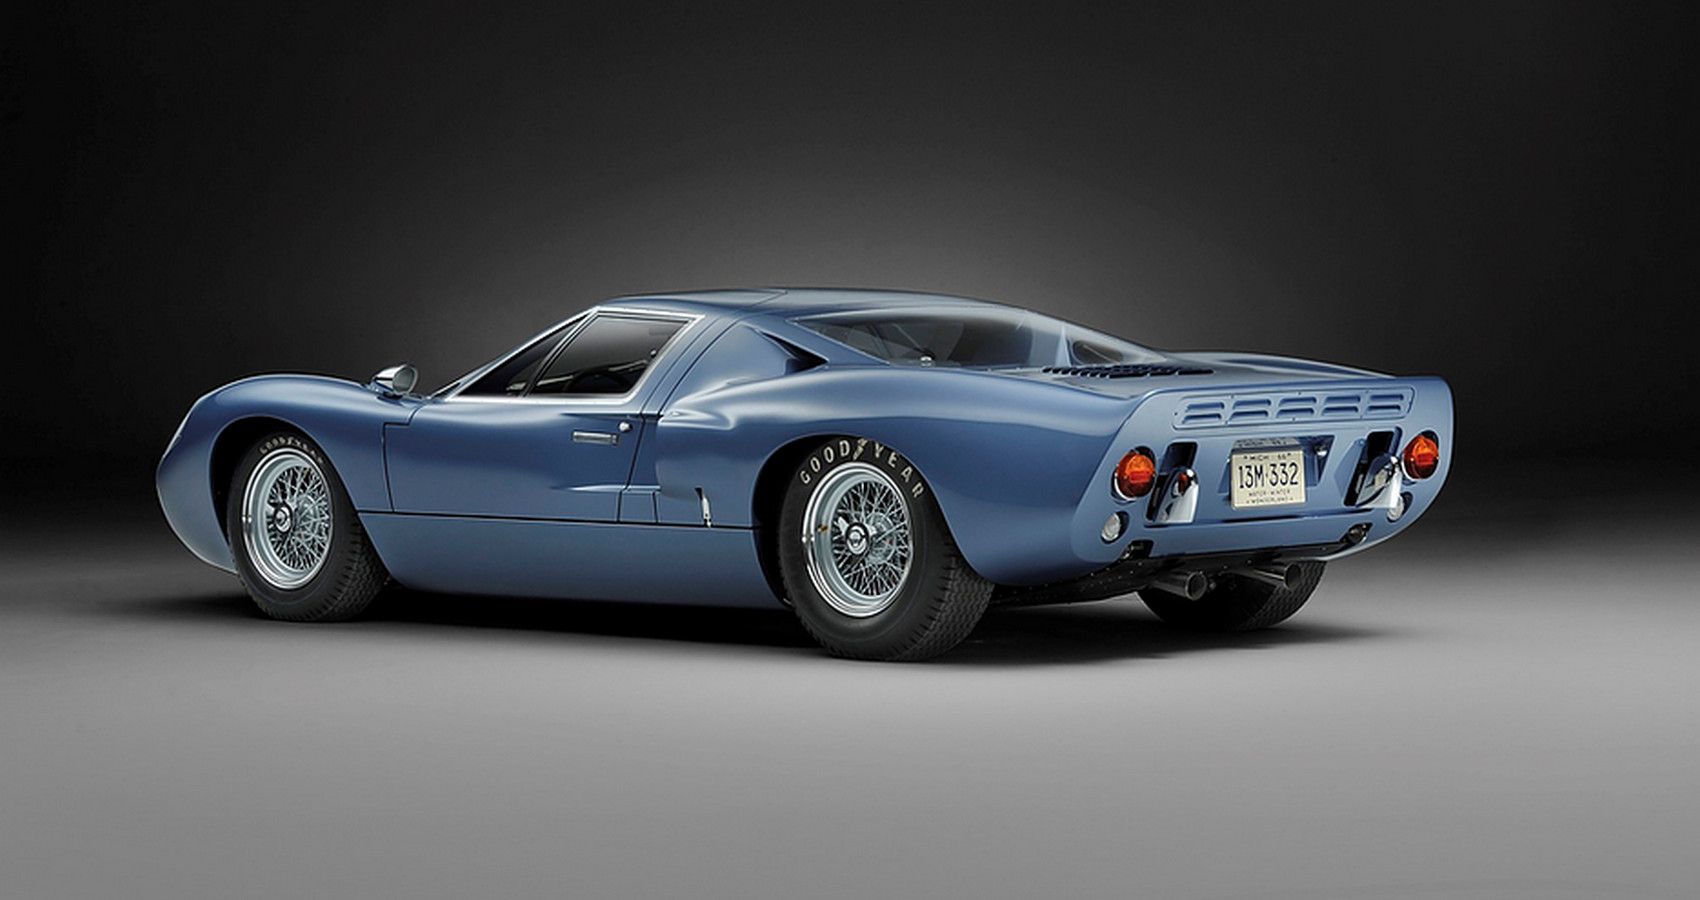 Rear quarter view of a Ford GT40 Mk III